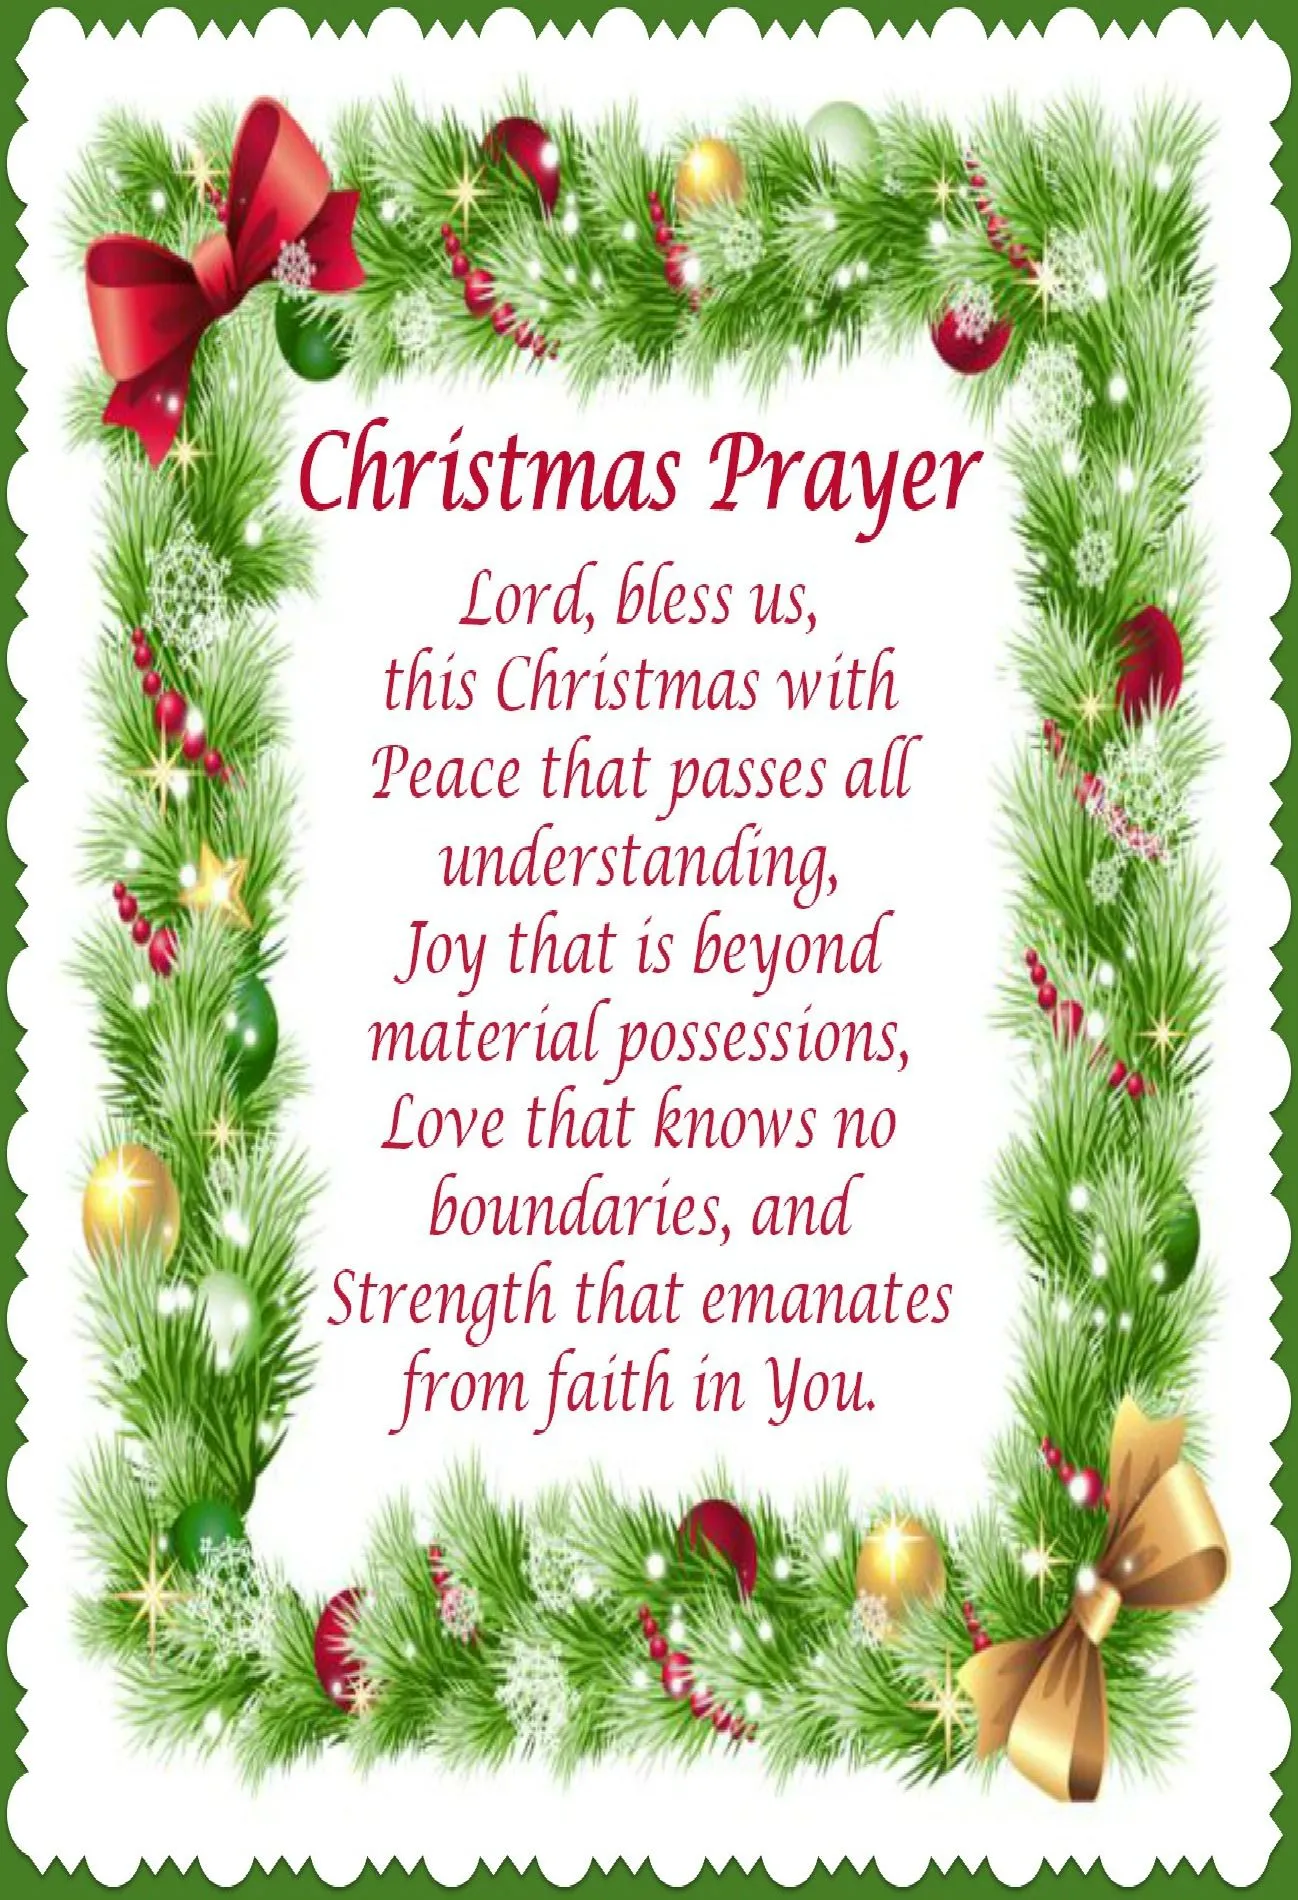 prayer for families at christmas